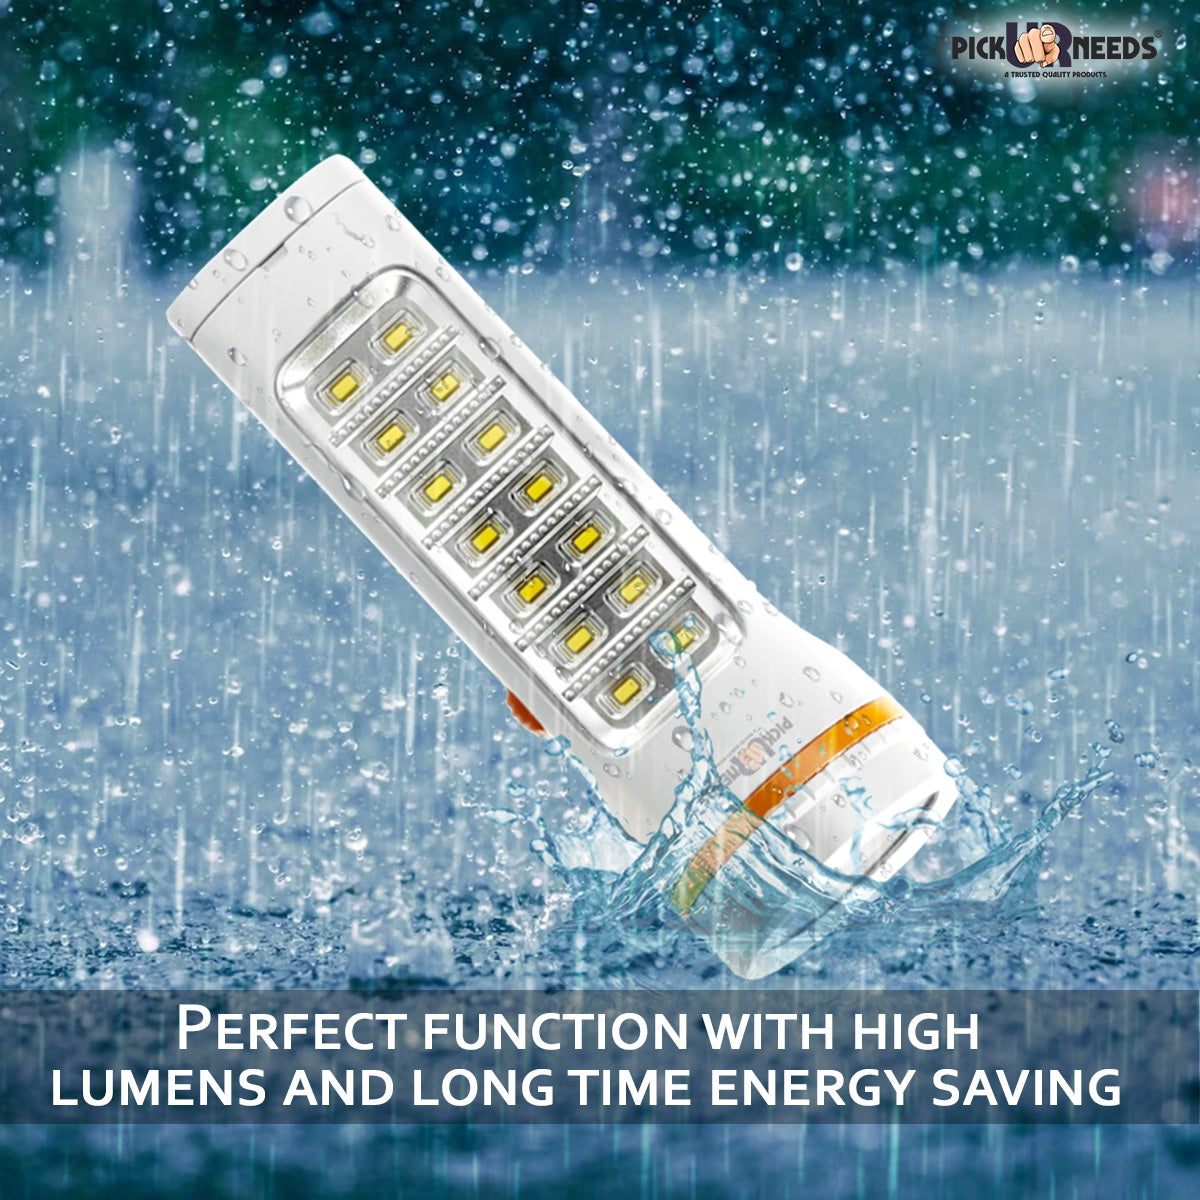 Pick Ur Needs Rechargeable 35W+14 SMD Emergency Long Range LED Torch Light With Slide charging 8 hrs Torch Emergency Light